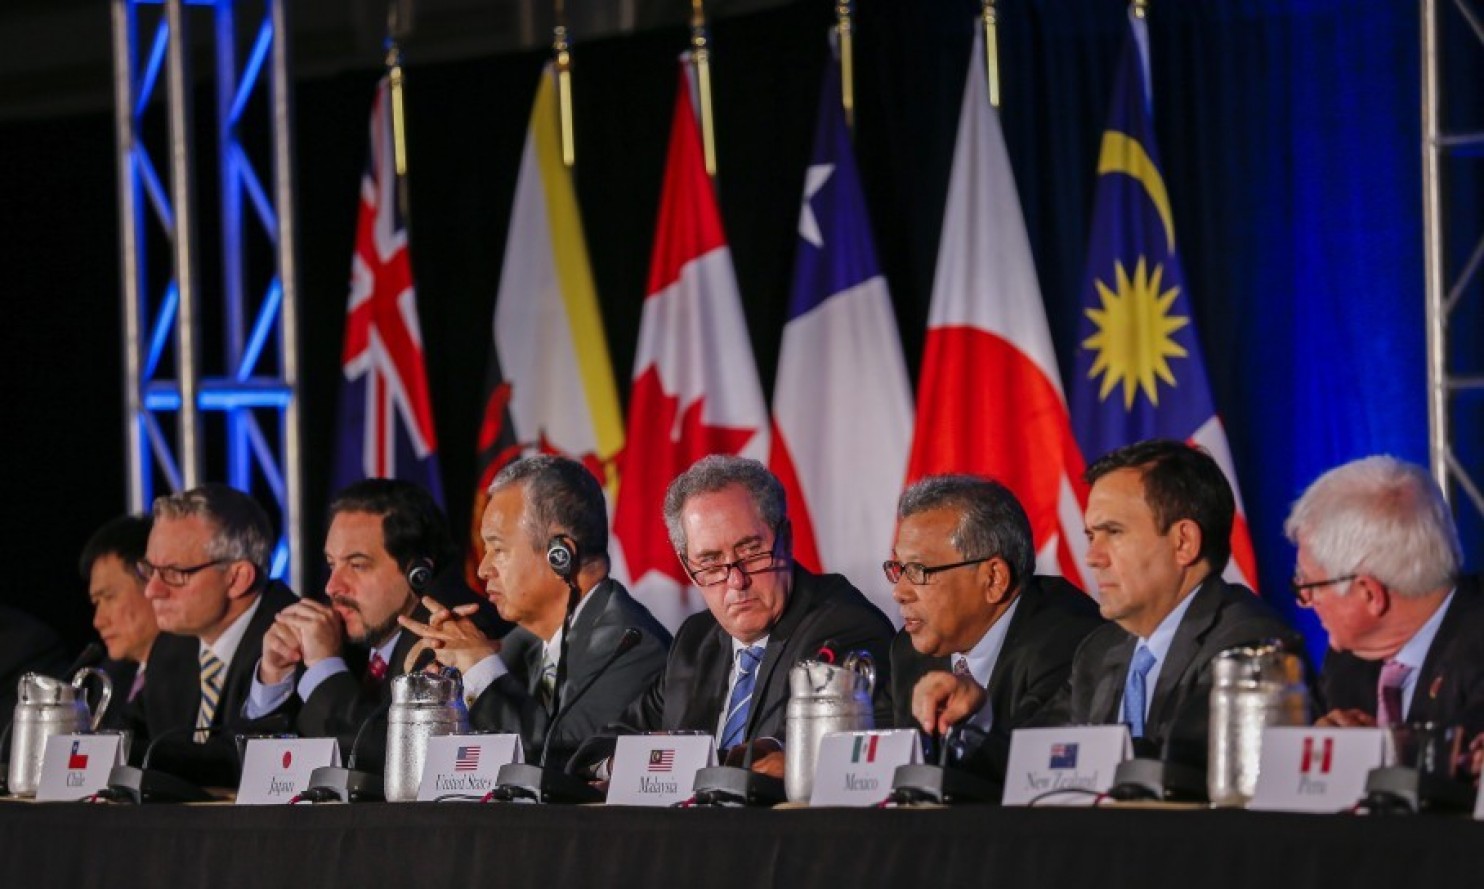 The TPP (Trans-Pacific Partnership) is dead